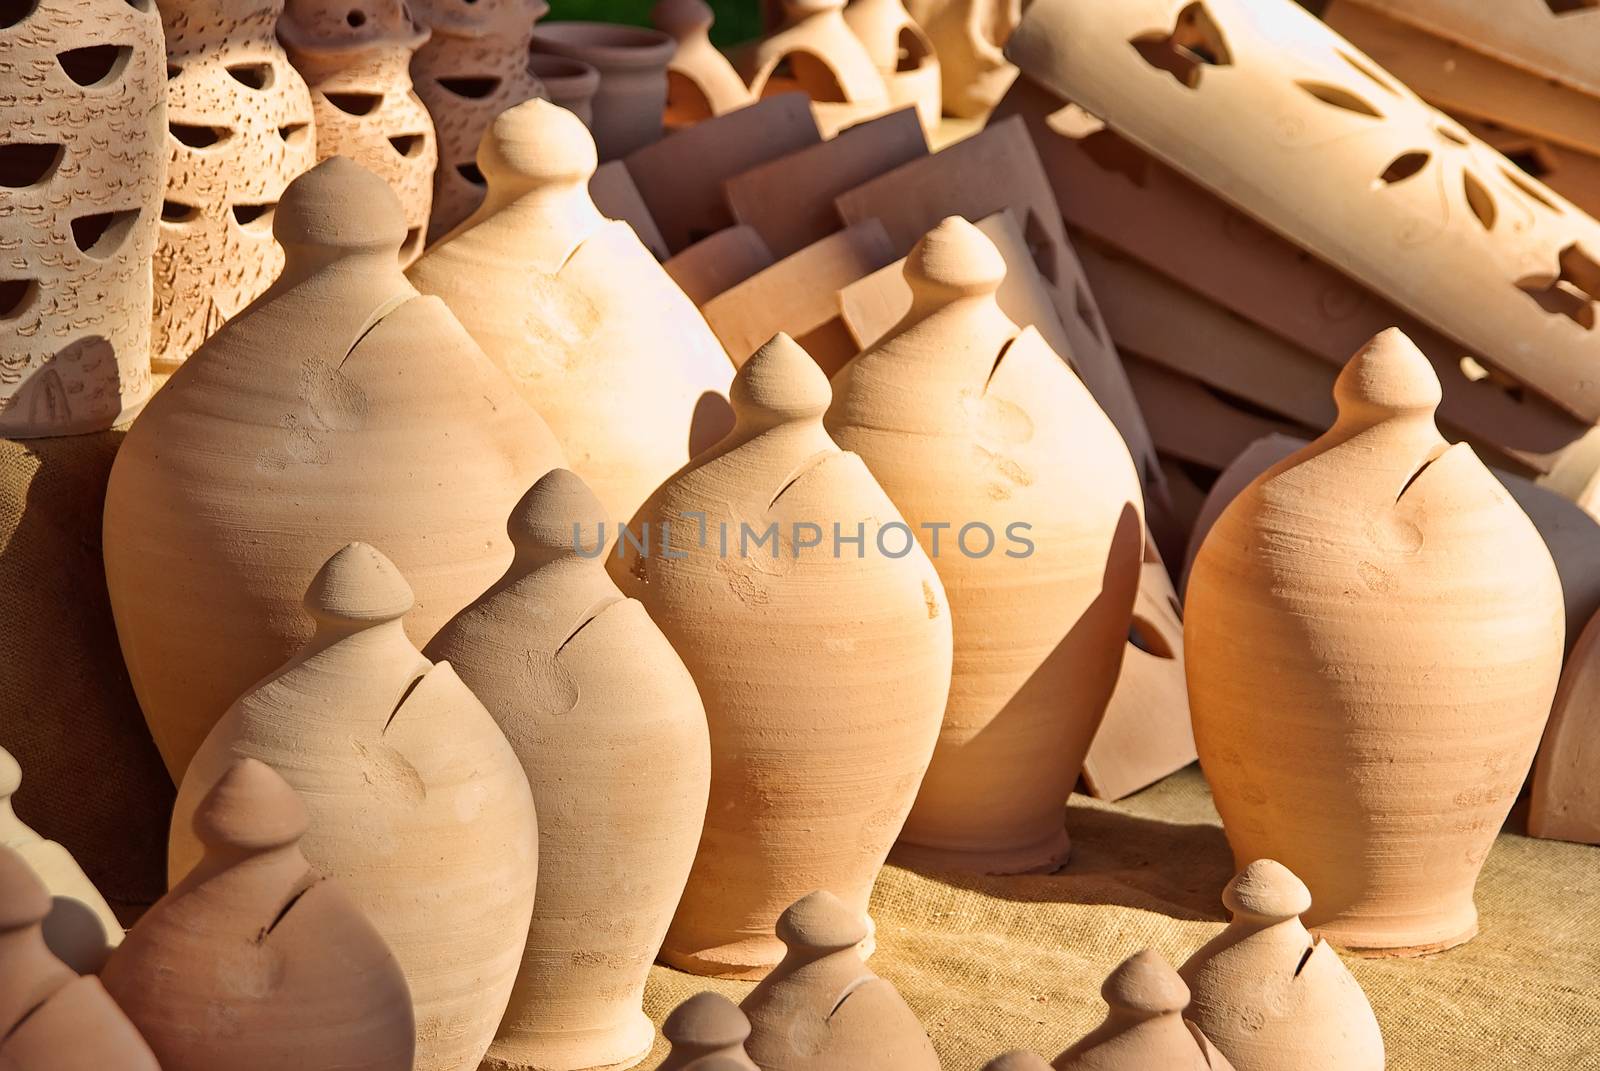 Typical ceramic pots from Majorca (Balearic Islands - Spain)